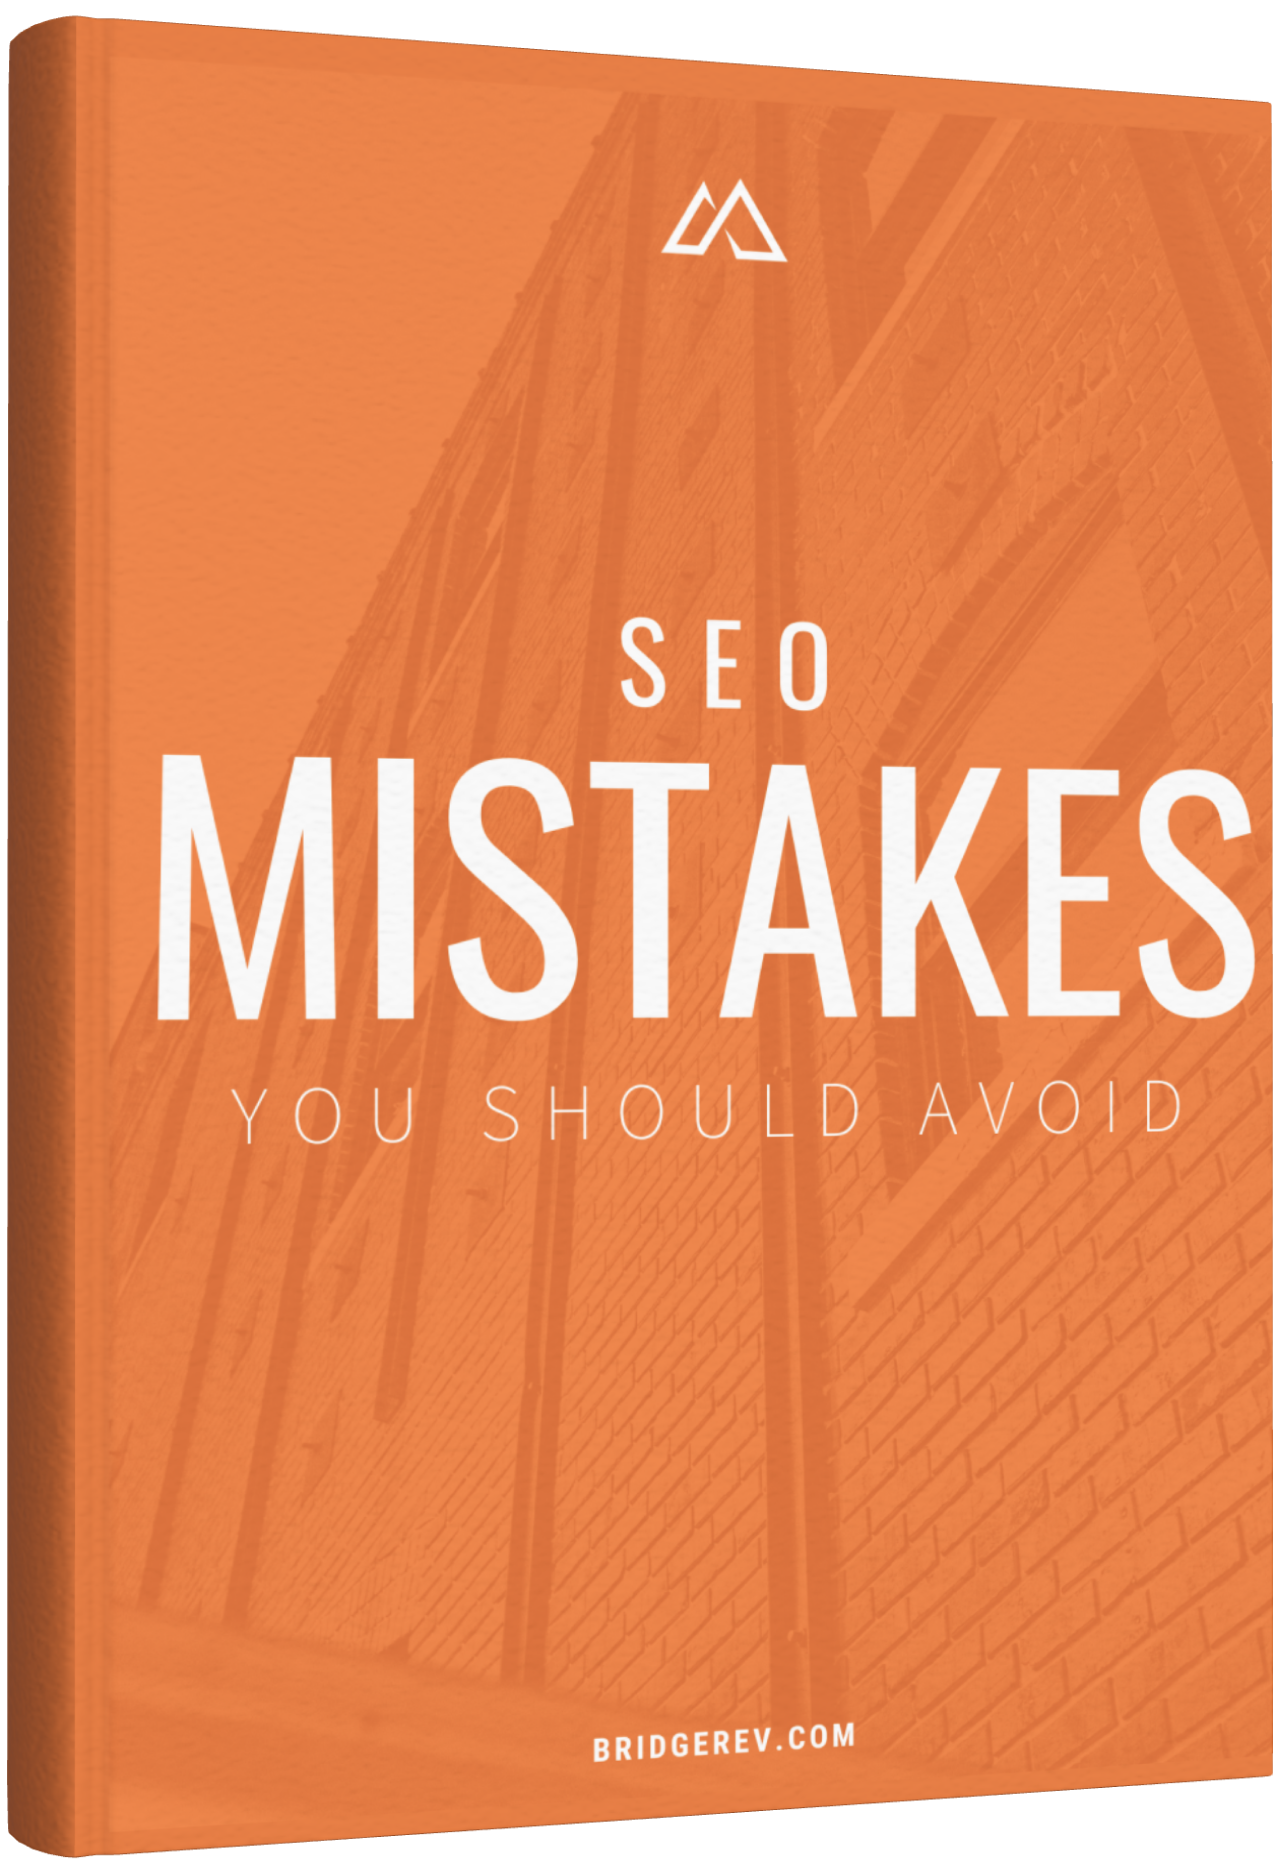 Offer - SEO Mistakes